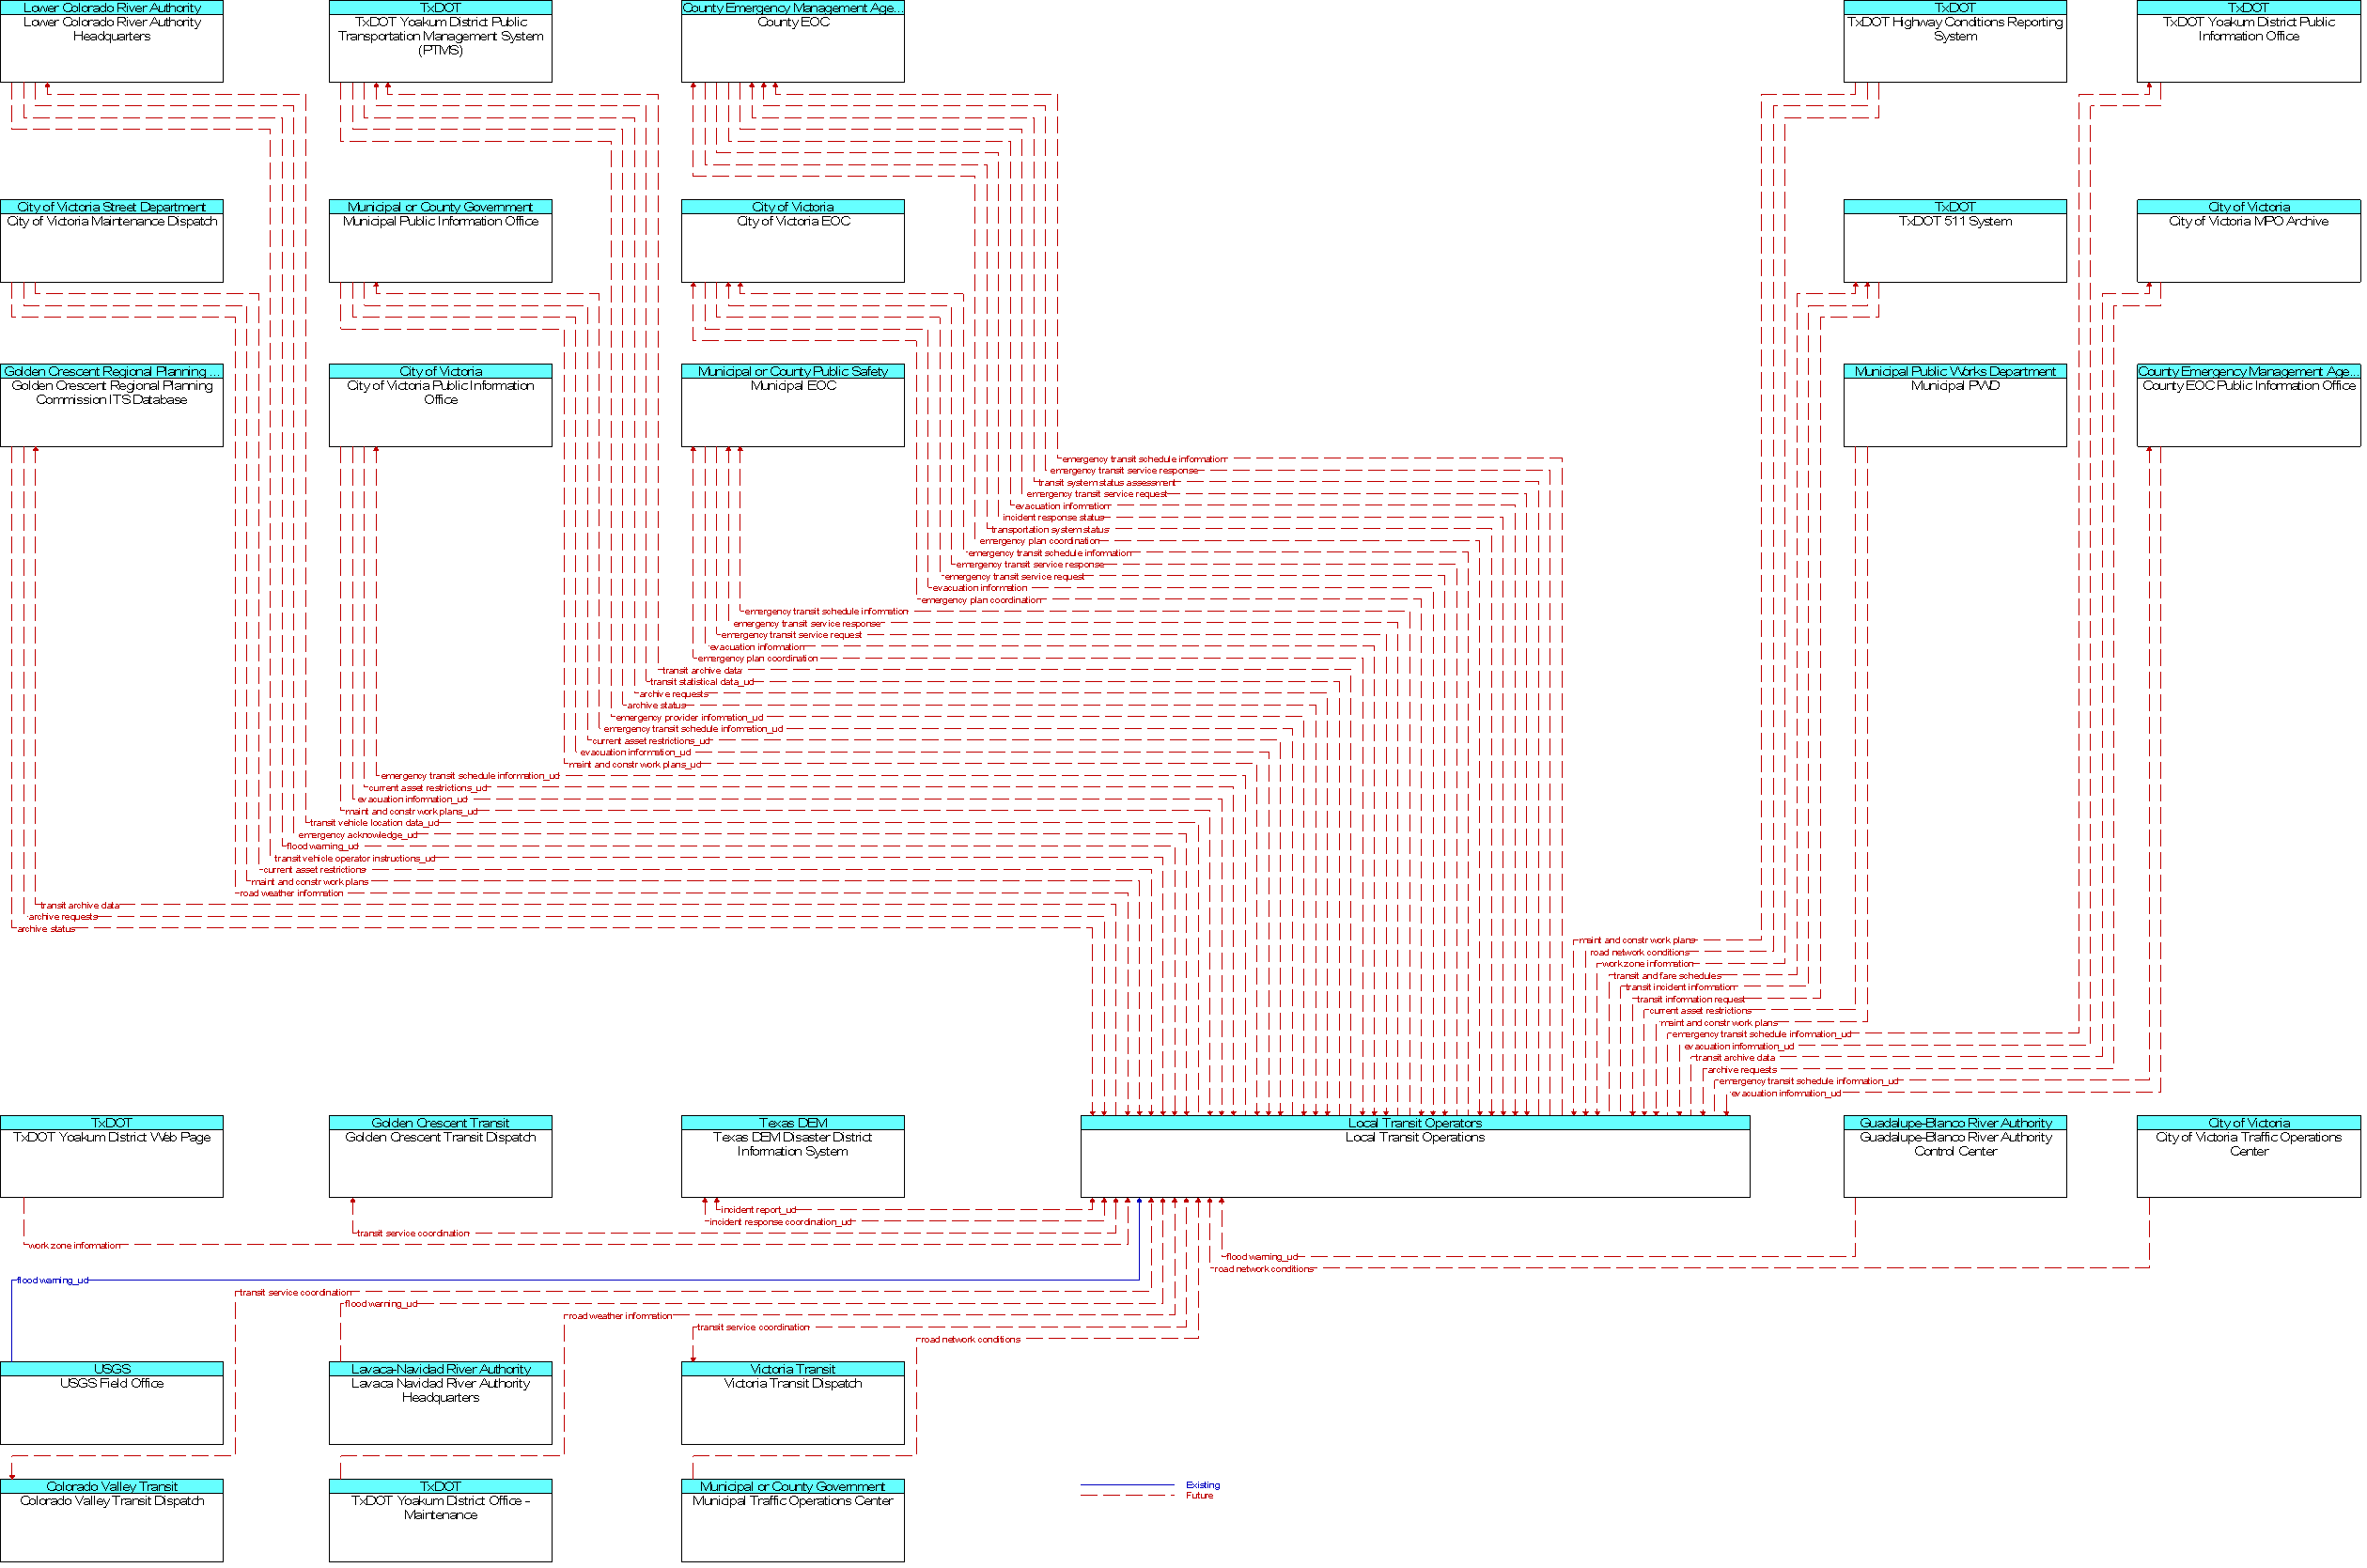 Context Diagram for Local Transit Operations